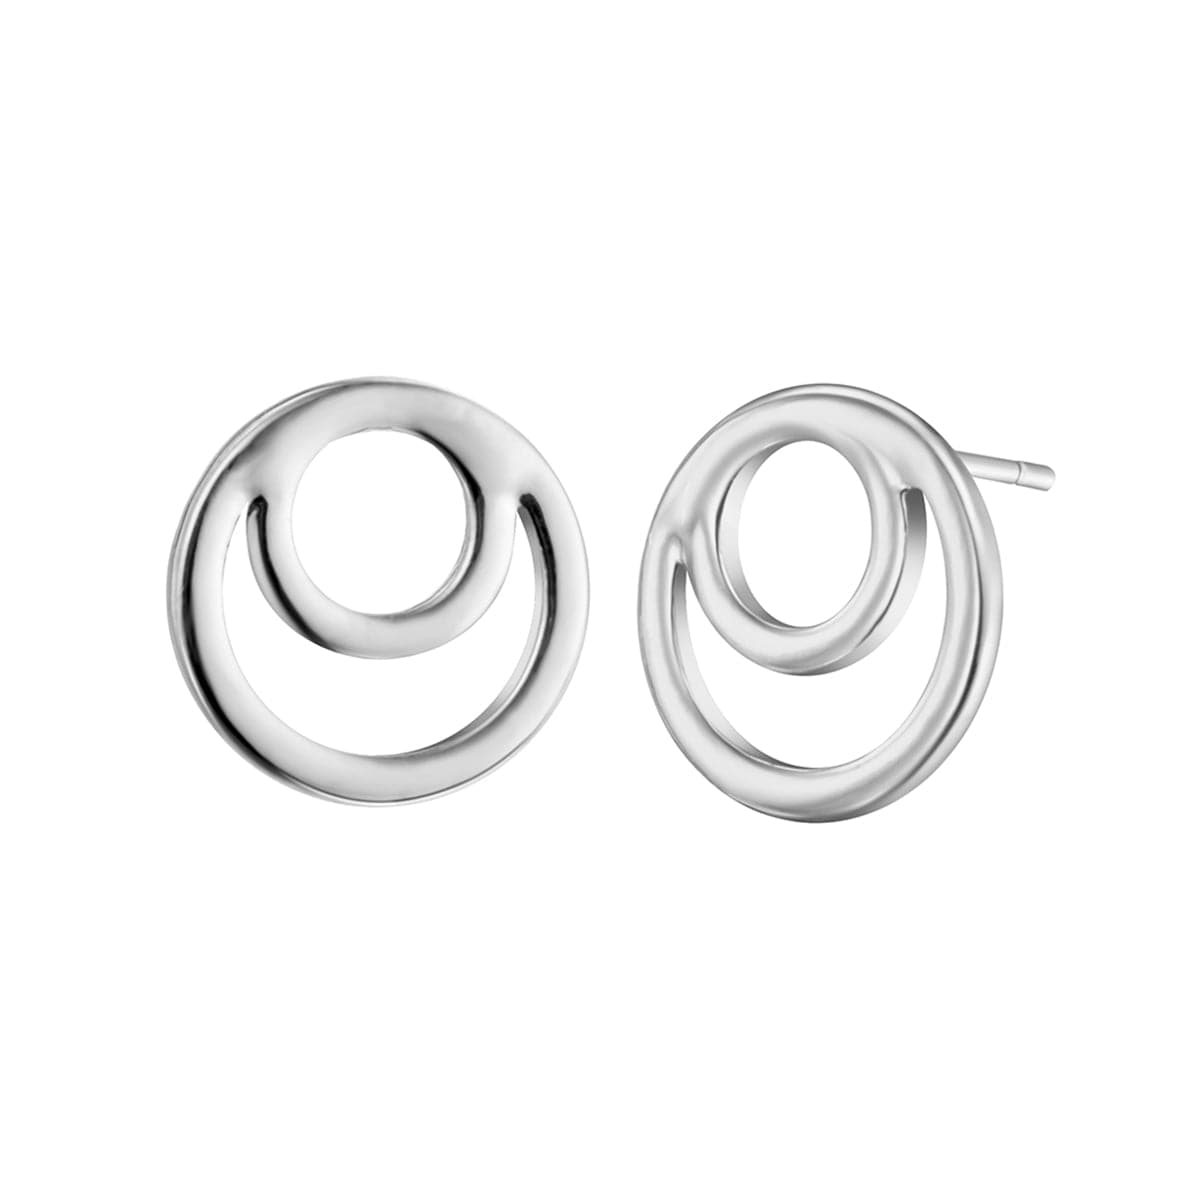 Silver-Plated Open Layered Circles Stud Earrings